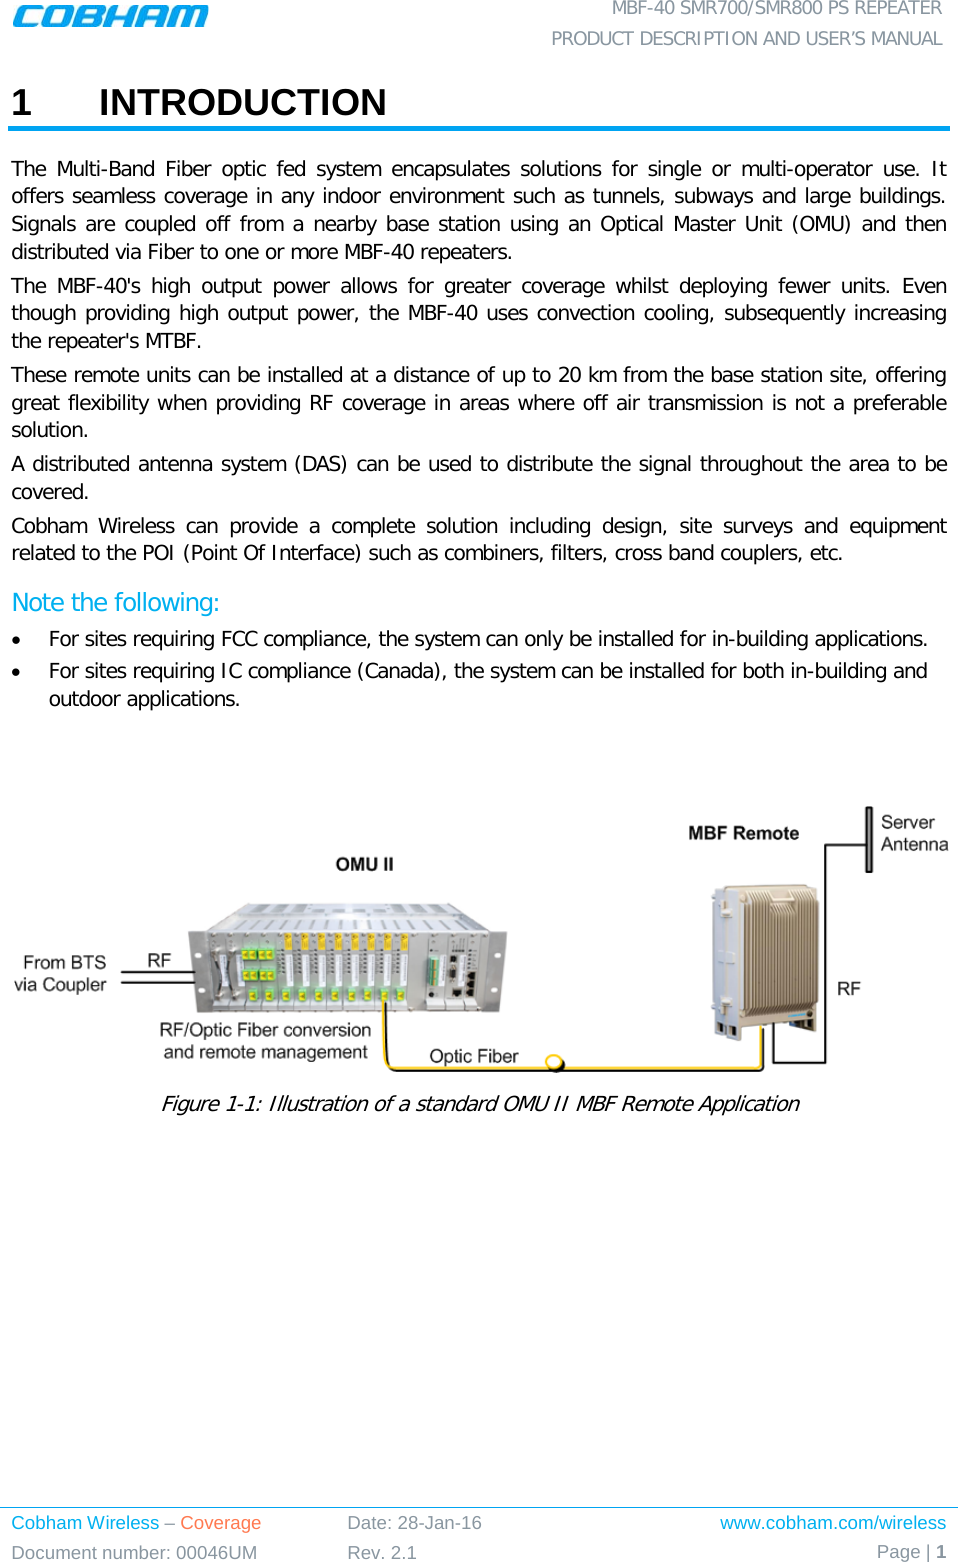 MBF-40 SMR700/SMR800 PS REPEATER PRODUCT DESCRIPTION AND USER’S MANUAL   Cobham Wireless – Coverage Date: 28-Jan-16 www.cobham.com/wireless Document number: 00046UM Rev. 2.1 Page | 1  1  INTRODUCTION The Multi-Band  Fiber optic fed system encapsulates solutions for single or multi-operator use. It offers seamless coverage in any indoor environment such as tunnels, subways and large buildings. Signals are coupled off from a nearby base station using an Optical Master Unit (OMU) and then distributed via Fiber to one or more MBF-40 repeaters.  The MBF-40&apos;s high output power allows for greater coverage whilst deploying fewer units.  Even though providing high output power, the MBF-40 uses convection cooling, subsequently increasing the repeater&apos;s MTBF. These remote units can be installed at a distance of up to 20 km from the base station site, offering great flexibility when providing RF coverage in areas where off air transmission is not a preferable solution. A distributed antenna system (DAS) can be used to distribute the signal throughout the area to be covered. Cobham Wireless can provide a complete solution including design, site surveys and equipment related to the POI (Point Of Interface) such as combiners, filters, cross band couplers, etc. Note the following: • For sites requiring FCC compliance, the system can only be installed for in-building applications. • For sites requiring IC compliance (Canada), the system can be installed for both in-building and outdoor applications.    Figure  1-1: Illustration of a standard OMU II MBF Remote Application    